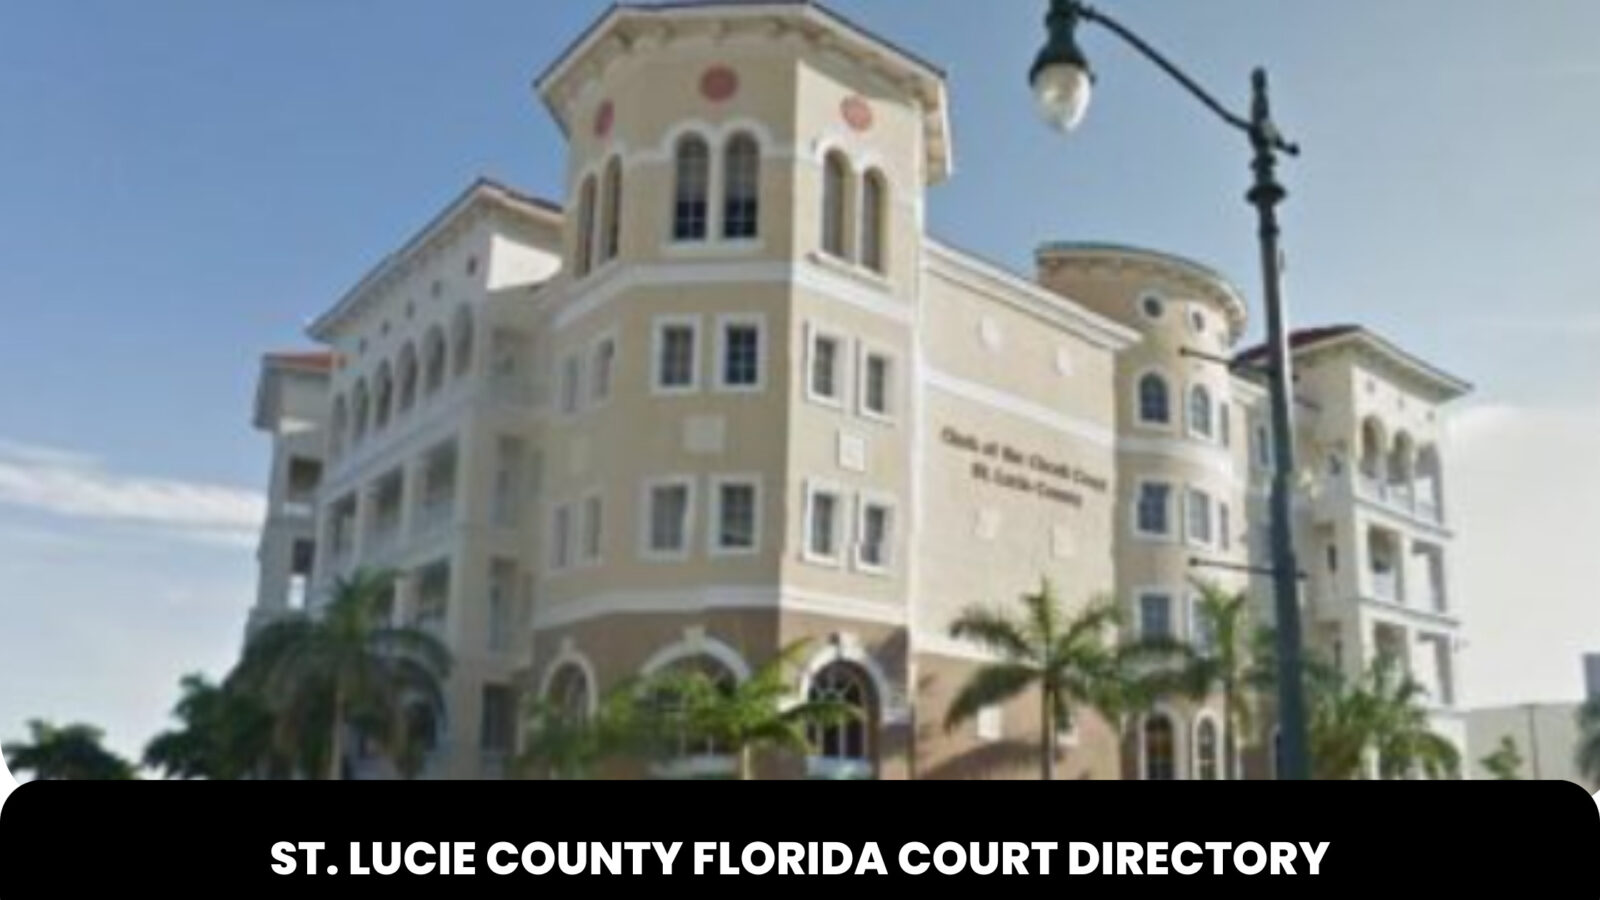 St. Lucie County Florida Court Directory 1